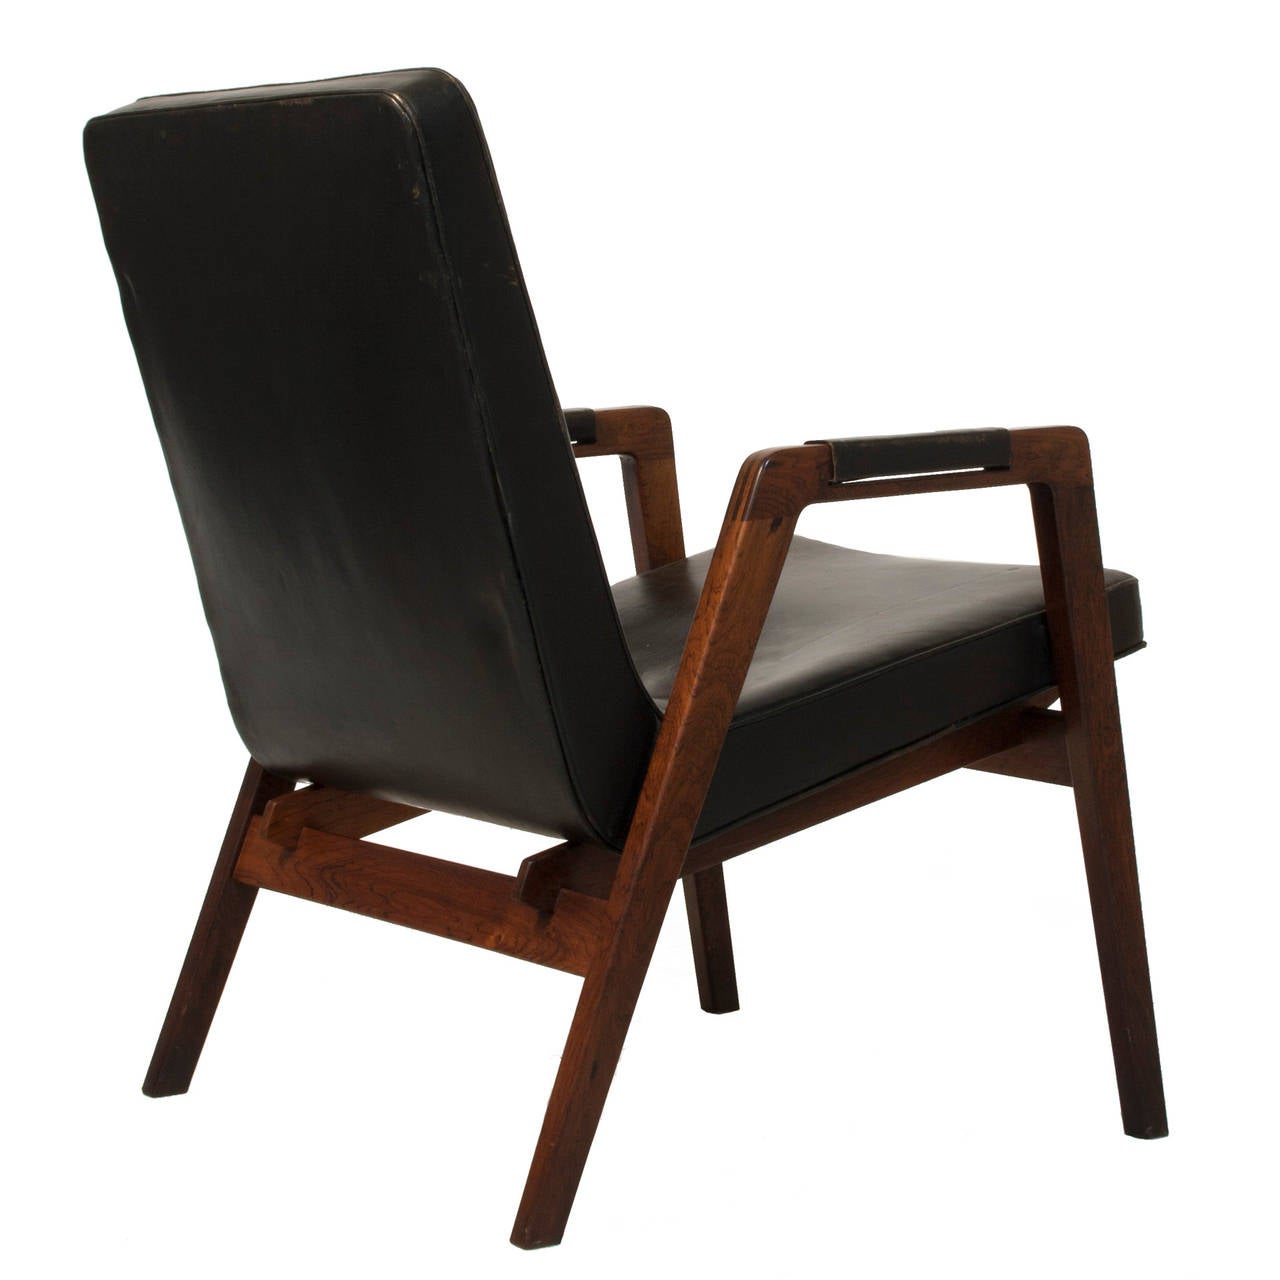 Black leather and rosewood lounge chair by Helge Brandt.